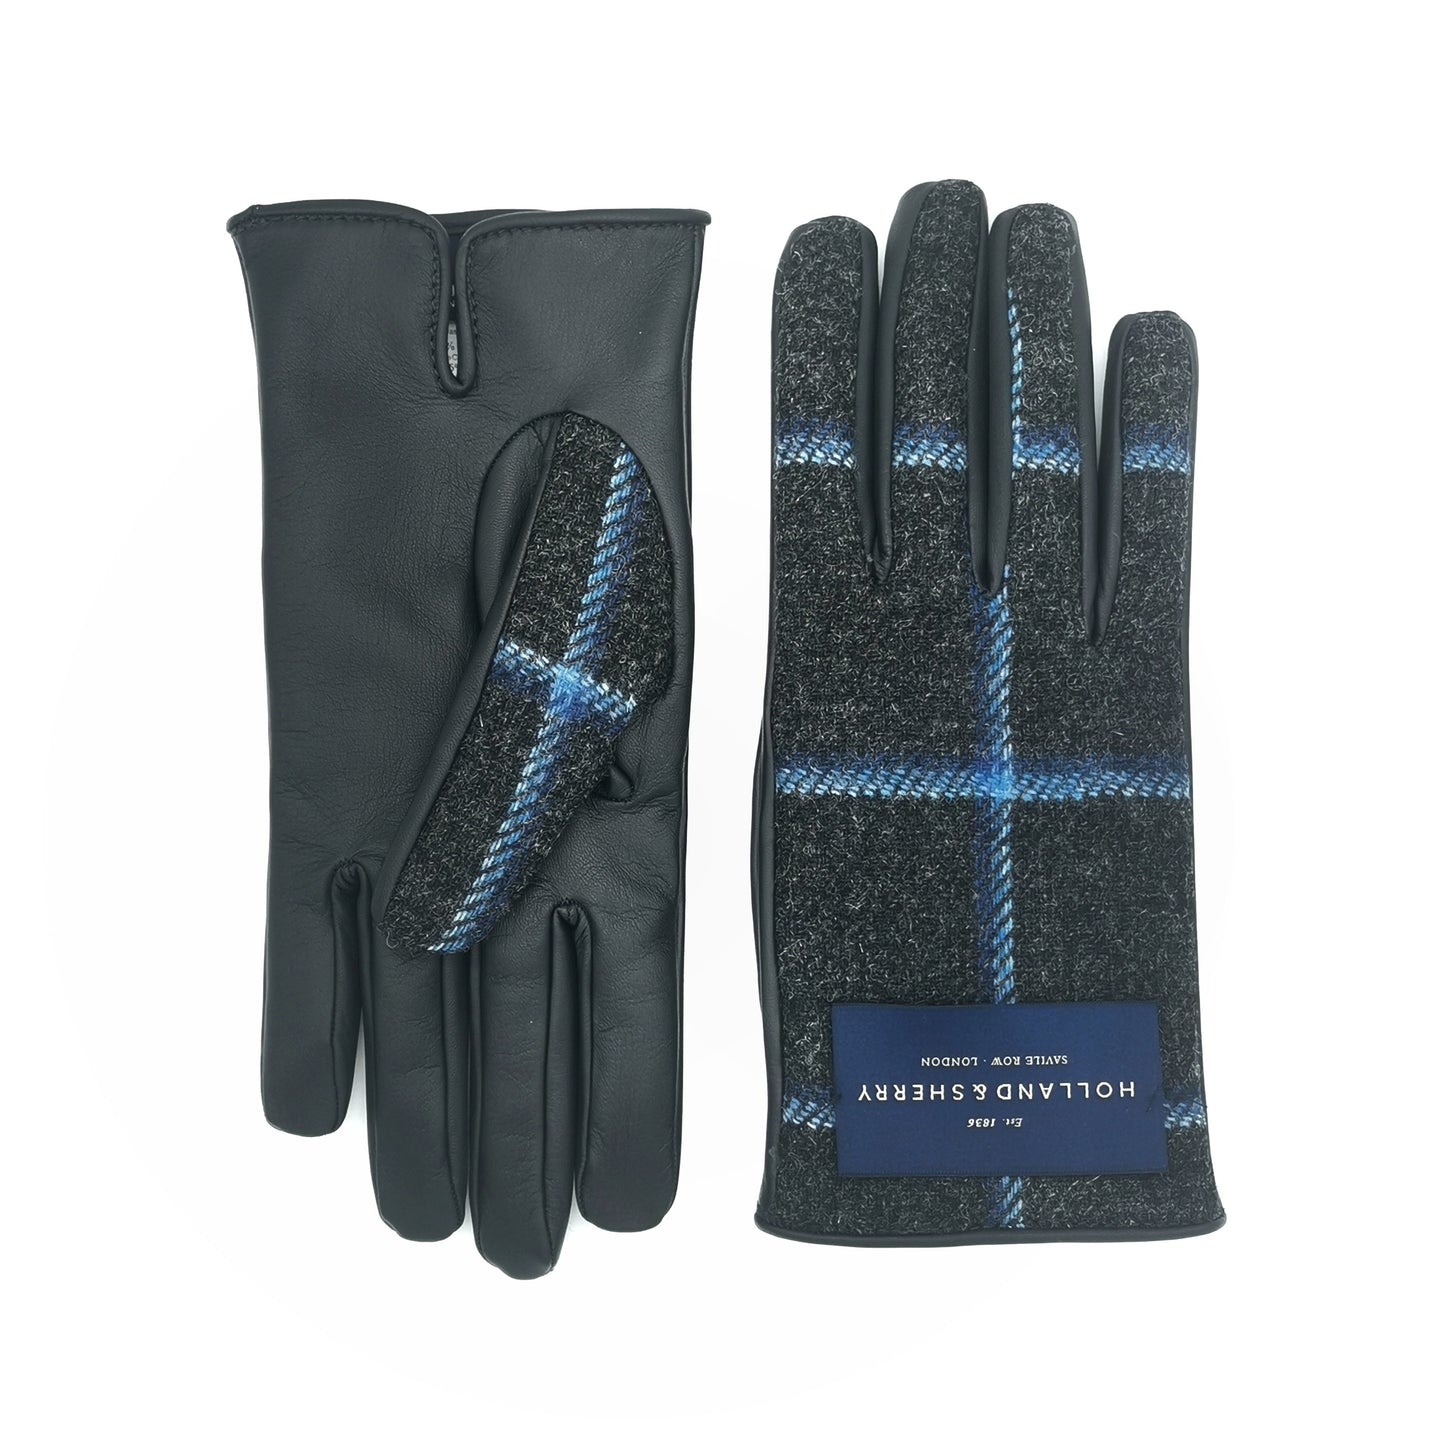 Bespoke Men's nappa touch leather gloves and Holland&Sherry wool top